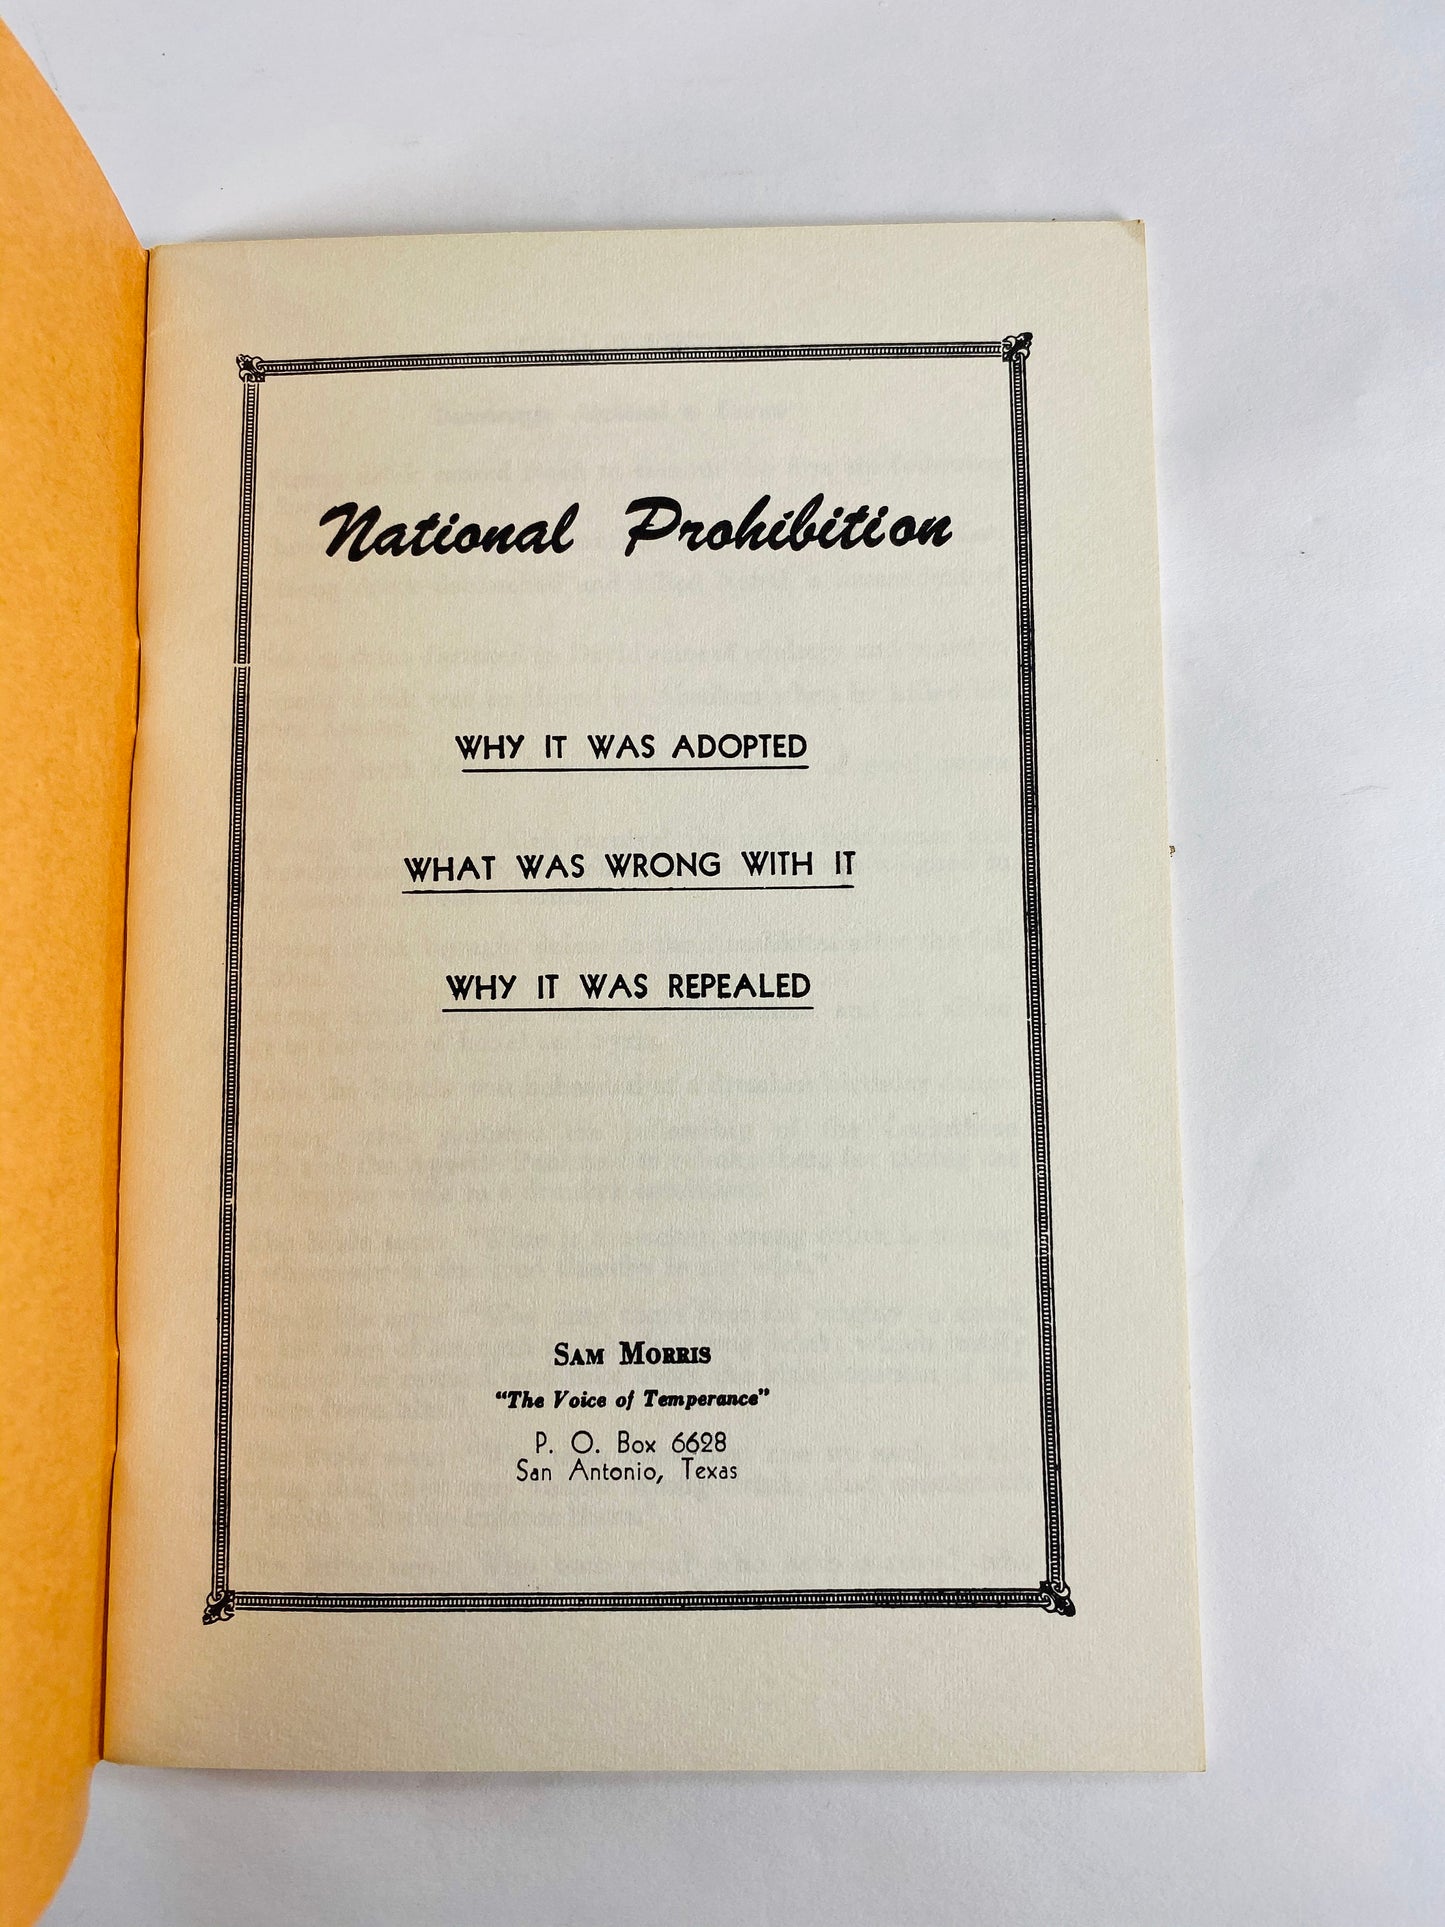 1954 National Prohibition vintage booklet by Sam Morris Rise Repeal and Return. Prohibition alcohol temperance campaign NA AA Al-Anon sober